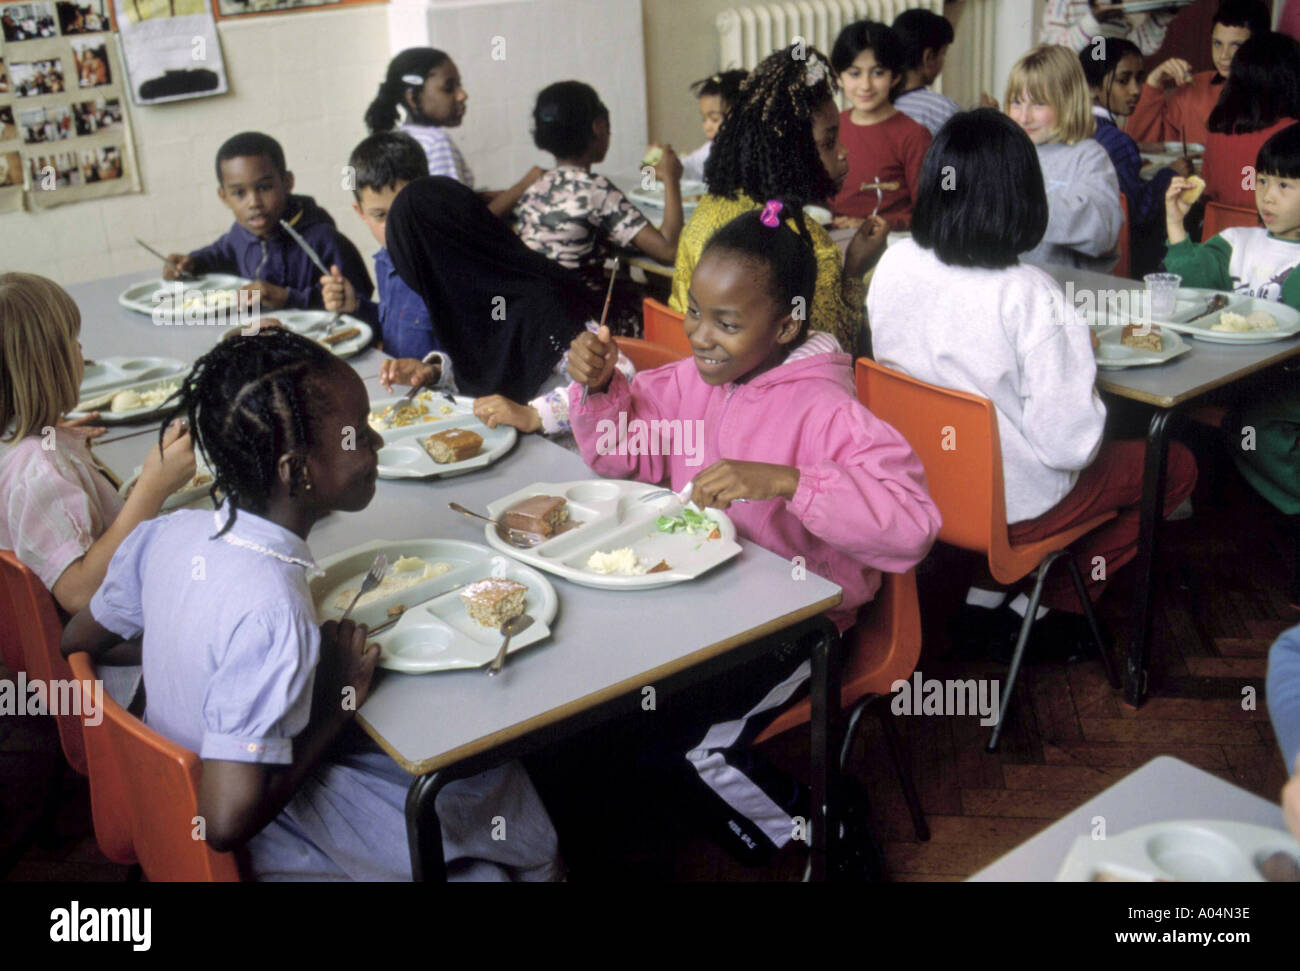 https://c8.alamy.com/comp/A04N3E/primary-school-canteen-with-children-eating-lunch-A04N3E.jpg